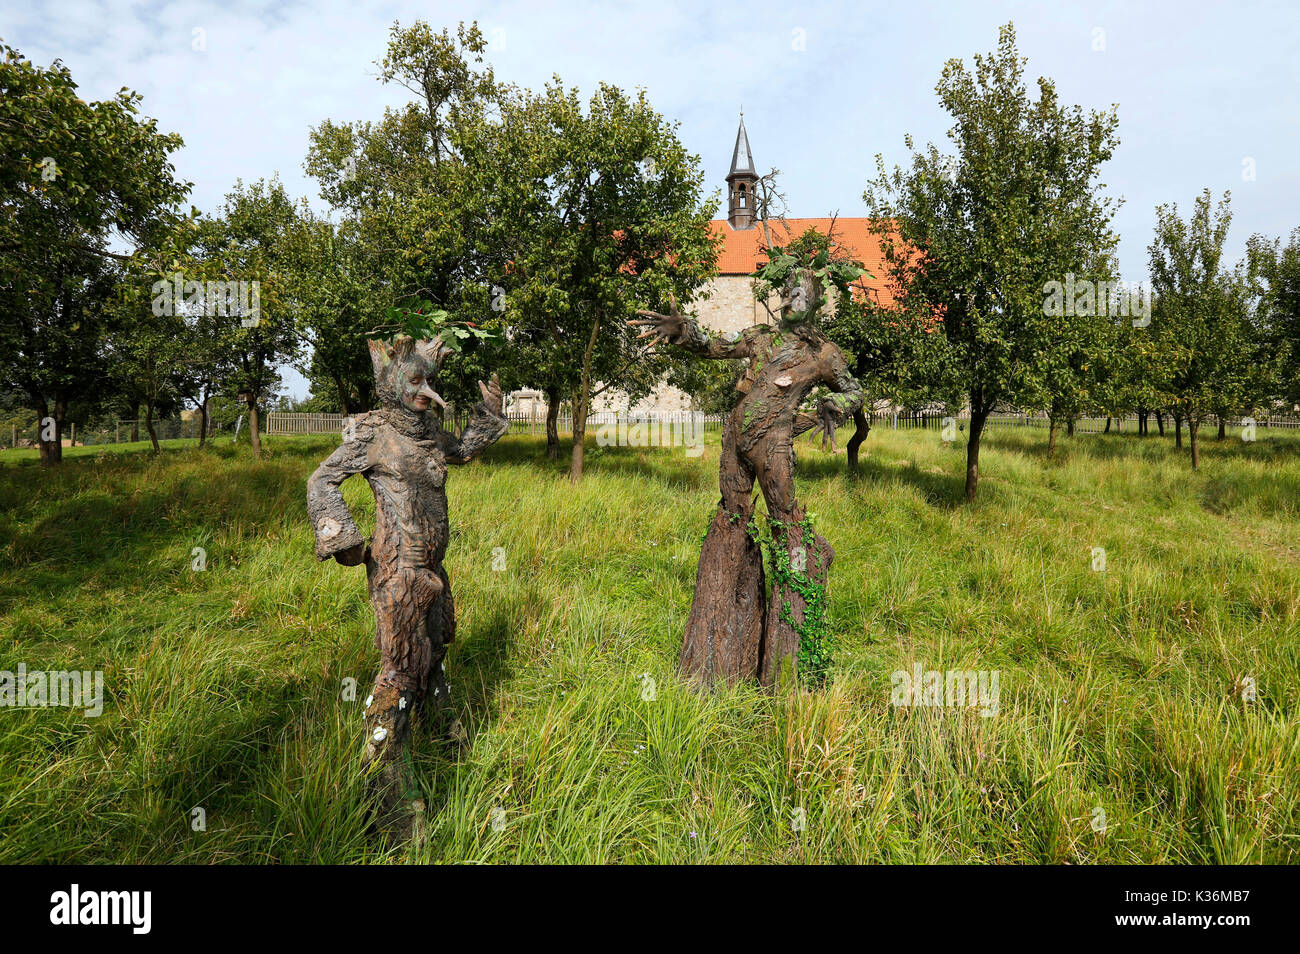 GEEK ART - Bodypainting meets SciFi, Fantasy and more: Fairytale photoshooting with model Maria and Enrico as tree-beings in the monastery garden of the monastery church Wittenburg on August 30, 2017  - A project of the photographer Tschiponnique Skupin and the bodypainter and transformaker Enrico Lein Stock Photo